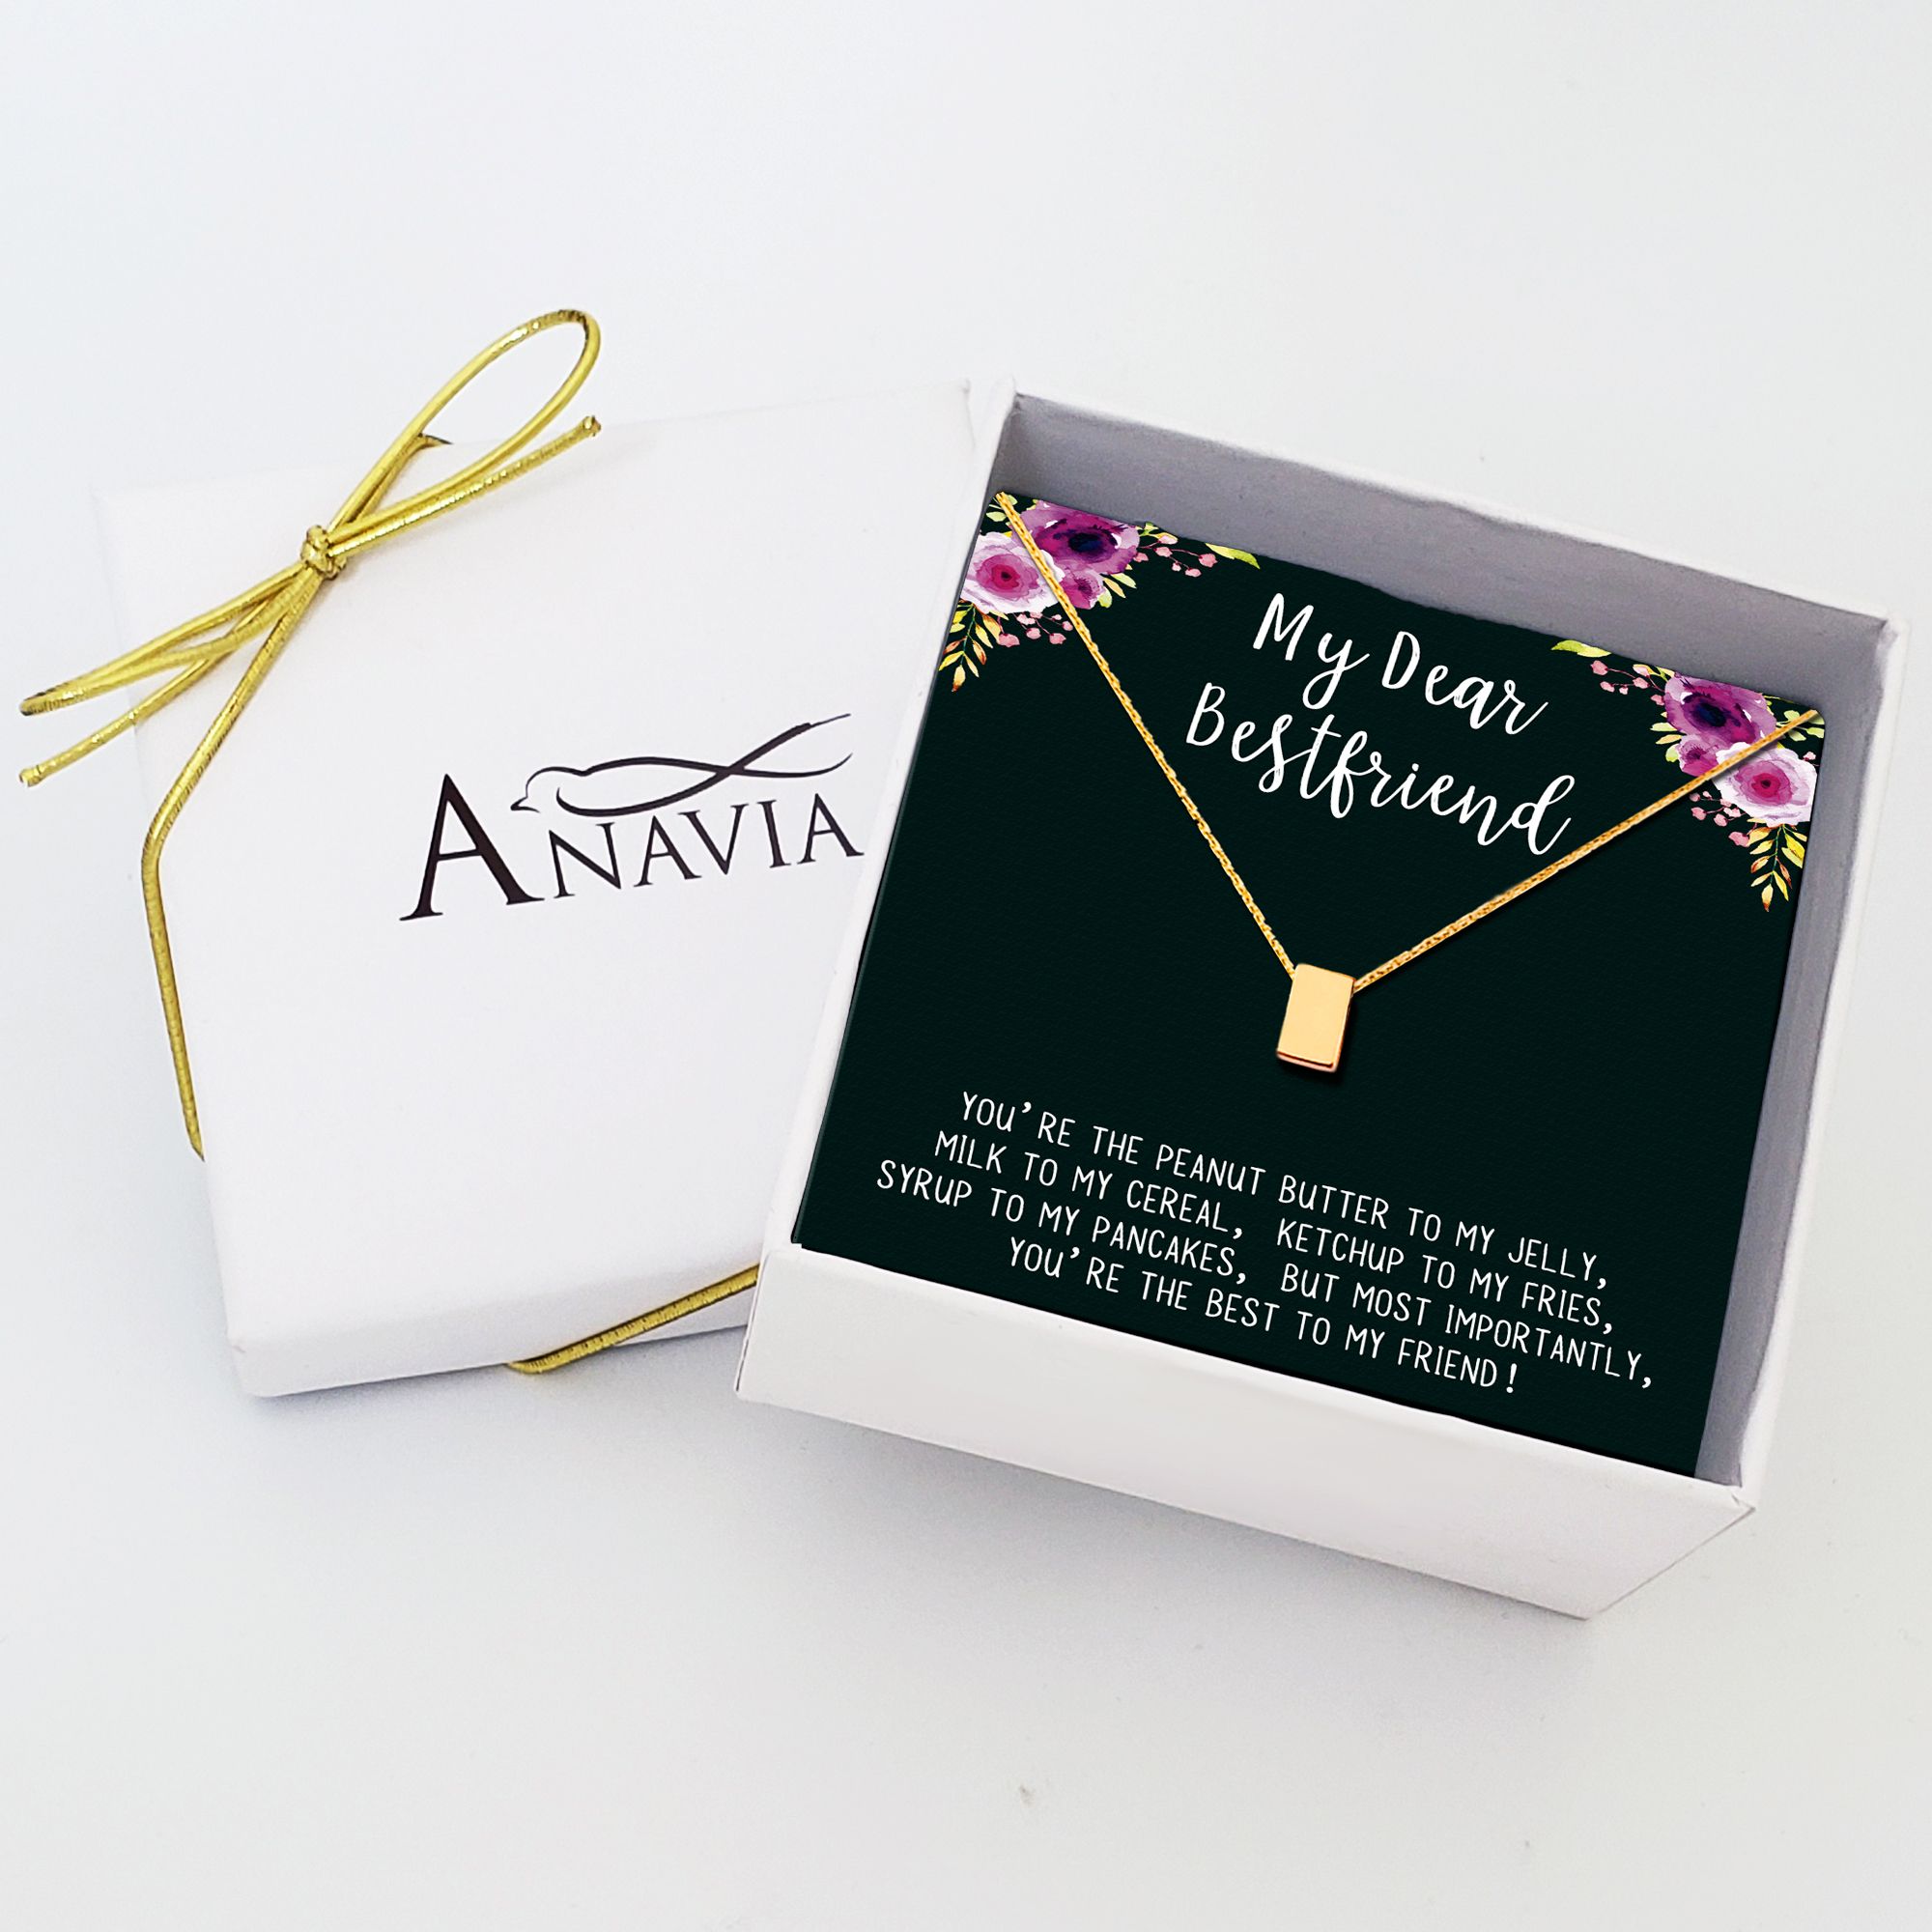 Anavia Best Friend Necklace, Friendship Jewelry, Best Friend Gifts, Gift for Friend, Birthday Gift, Christmas Gift for Her, Cube Pendant Necklace with Wish Card -[Gold Charm] - image 2 of 6